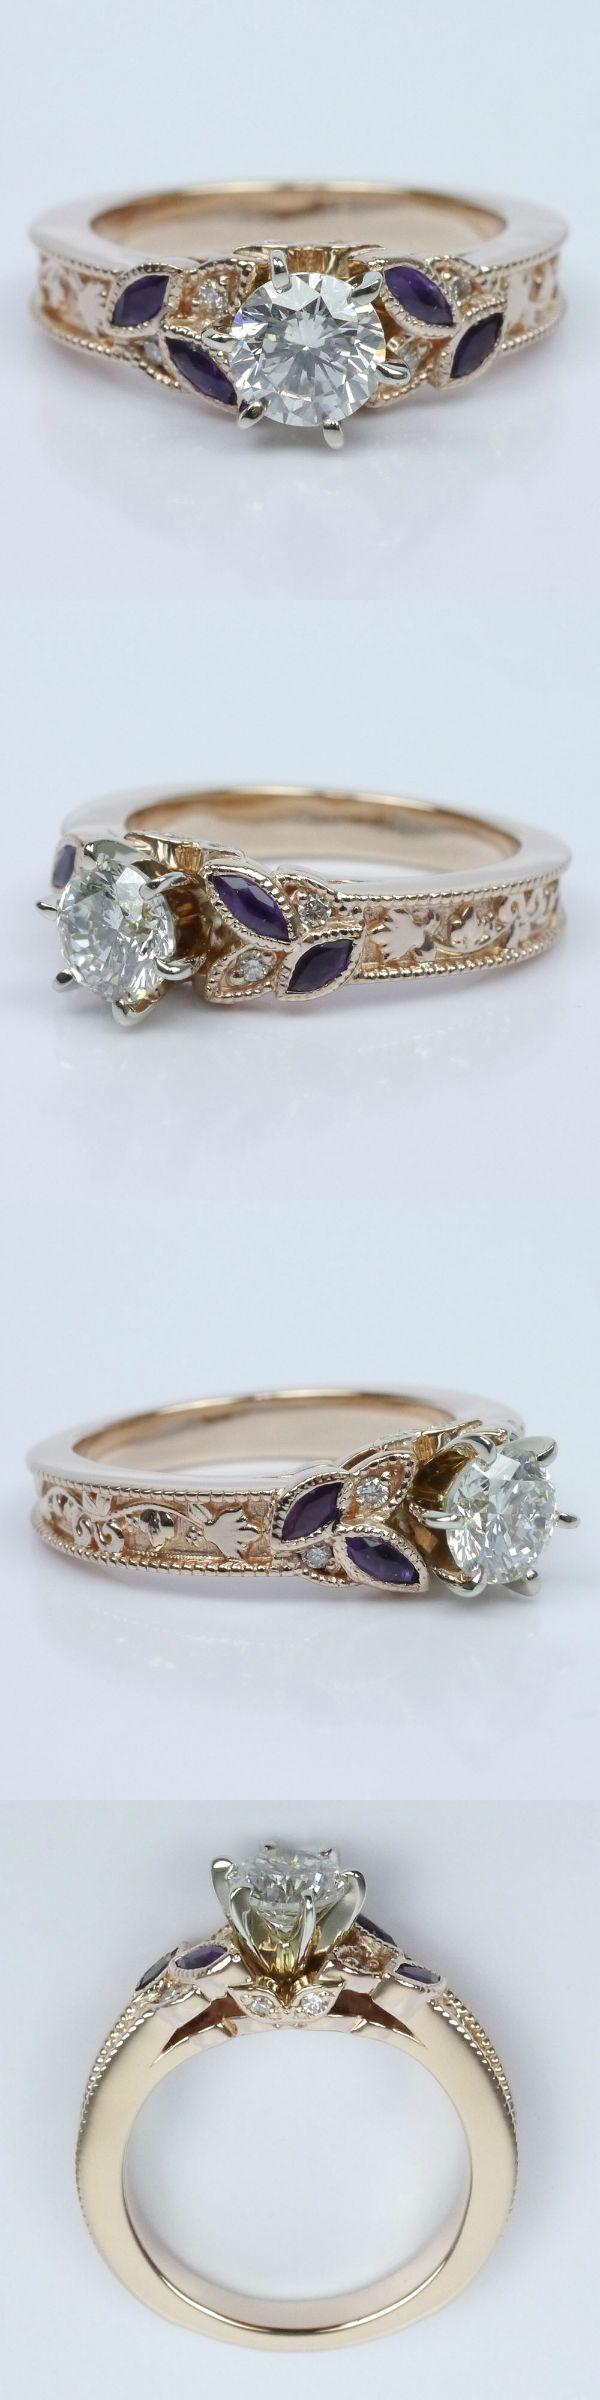 Wedding - Vintage Diamond And Amethyst Floral Engagement Ring